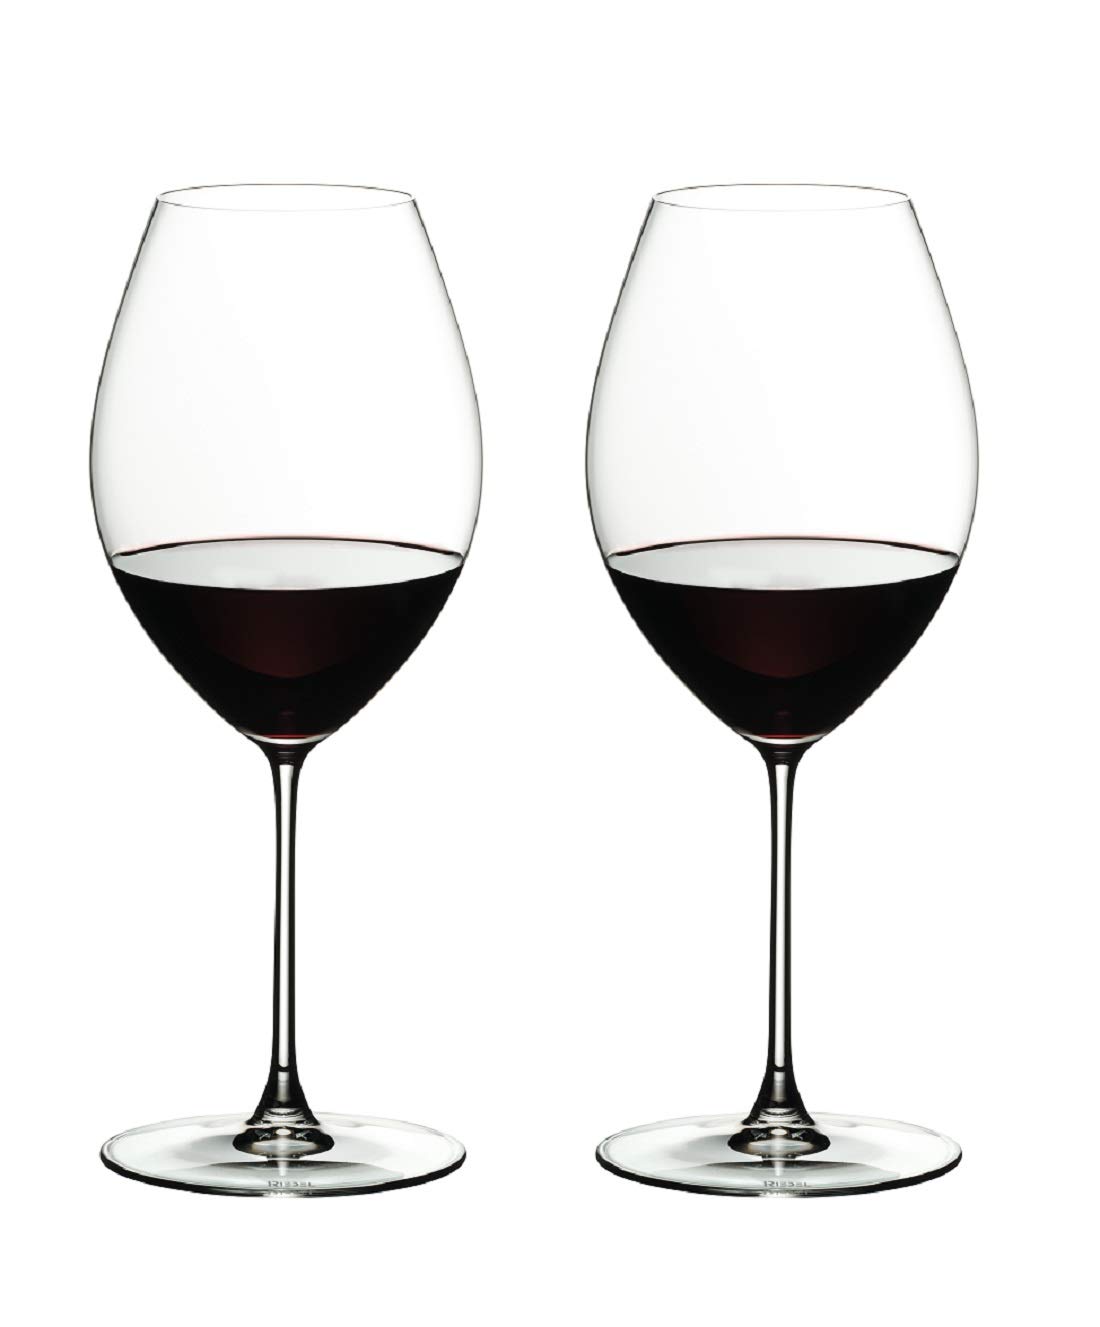 Riedel Veritas Old World Syrah Glass (Set of 2) - 21.16 oz - Clear